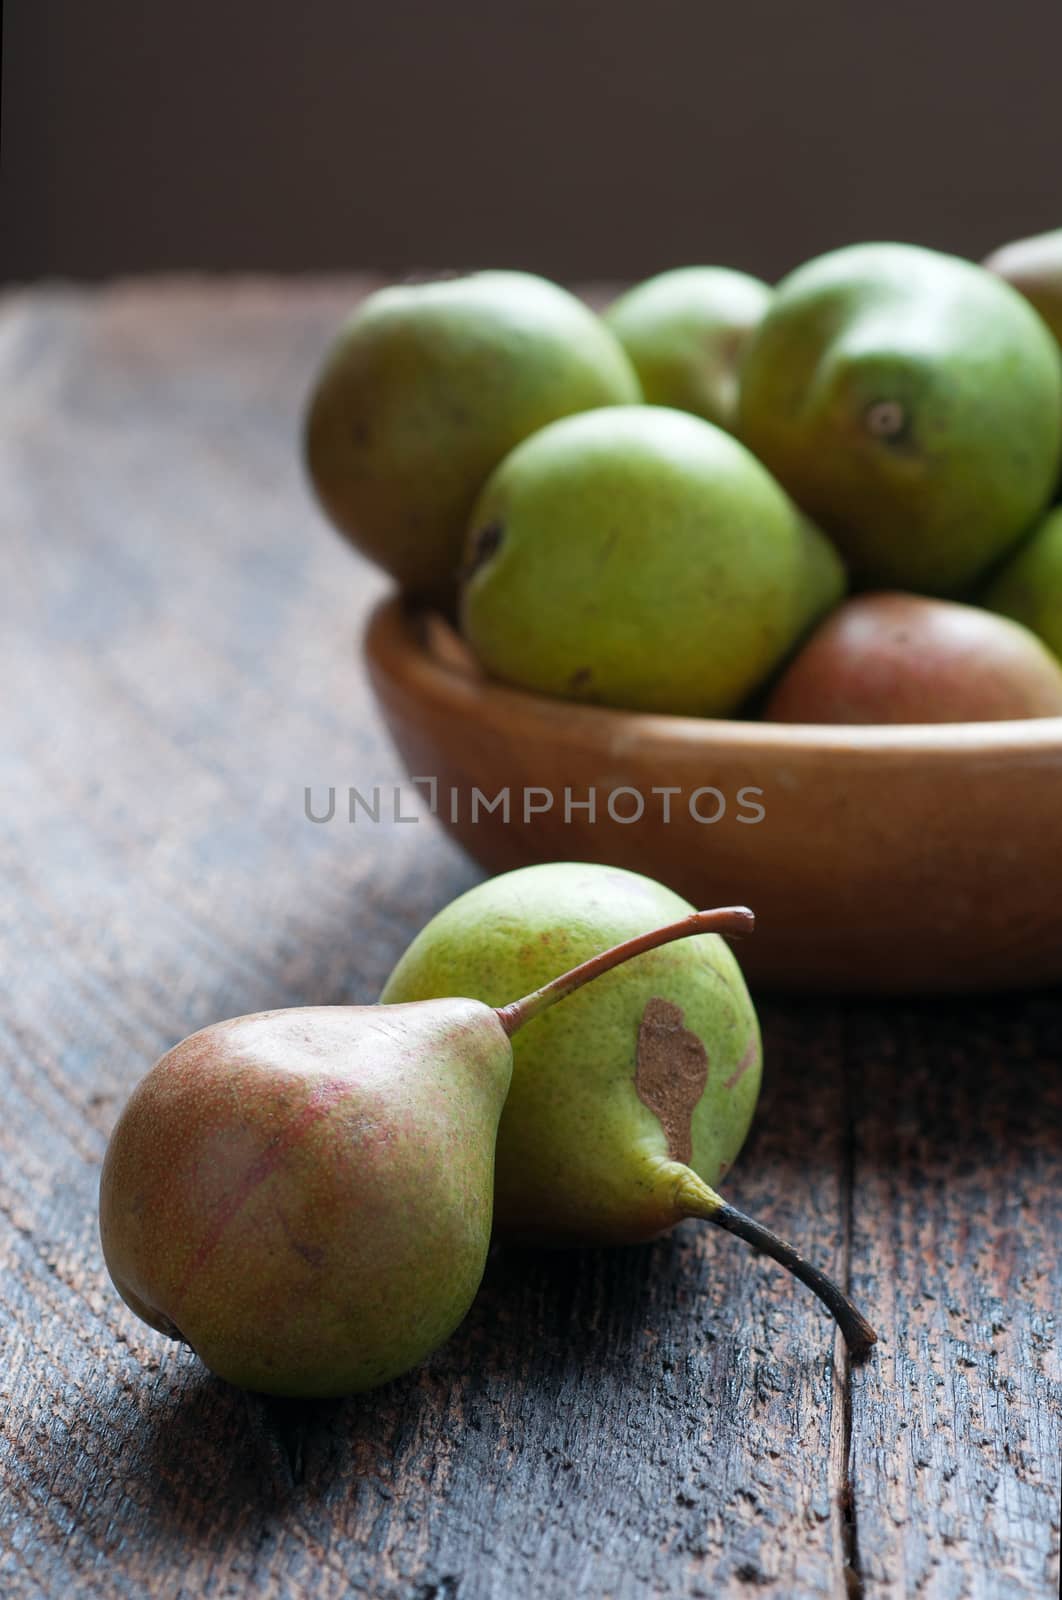 Green Pears in Wooden Plate On The Table